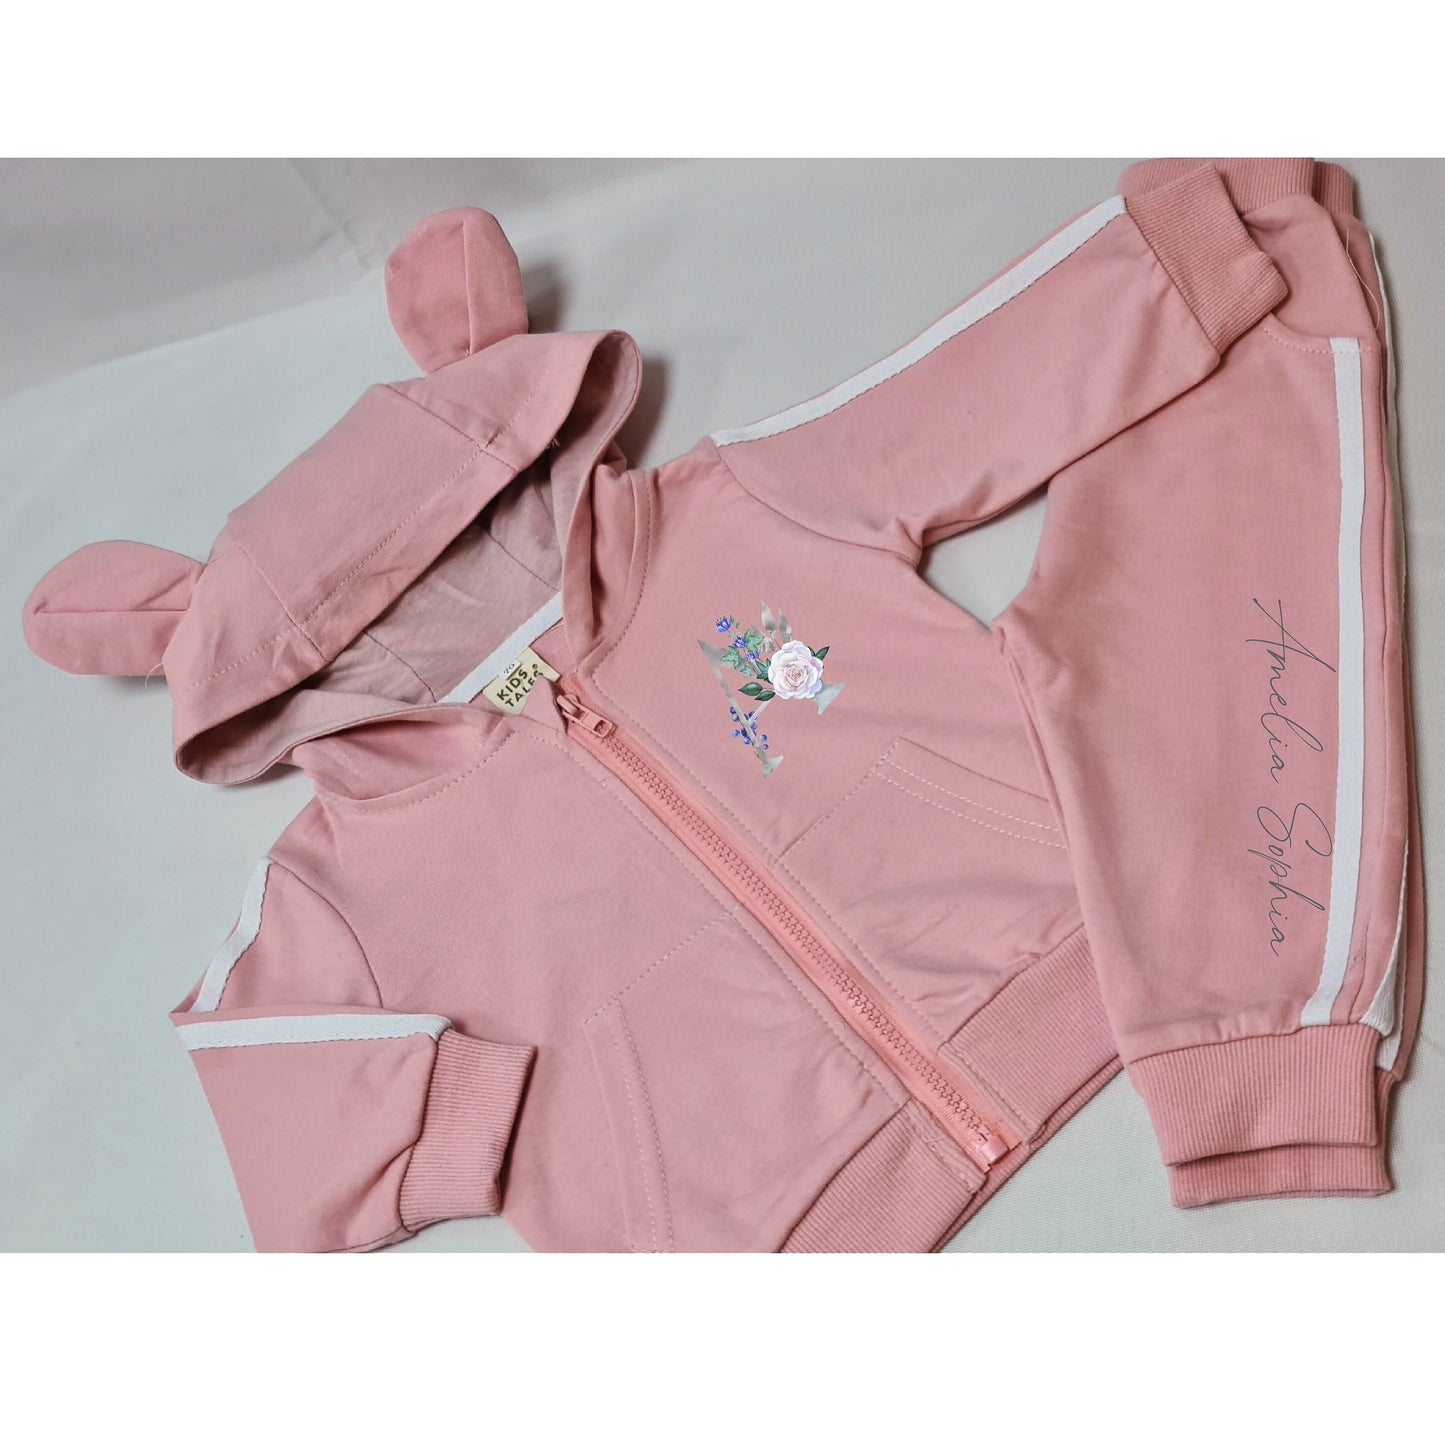 Personalised Children's Ear Loungewear Tracksuit, Silver Floral Initial & Name, 2 Piece Hooded Outfit, Baby, Toddler, Child's Zip Up Trackie